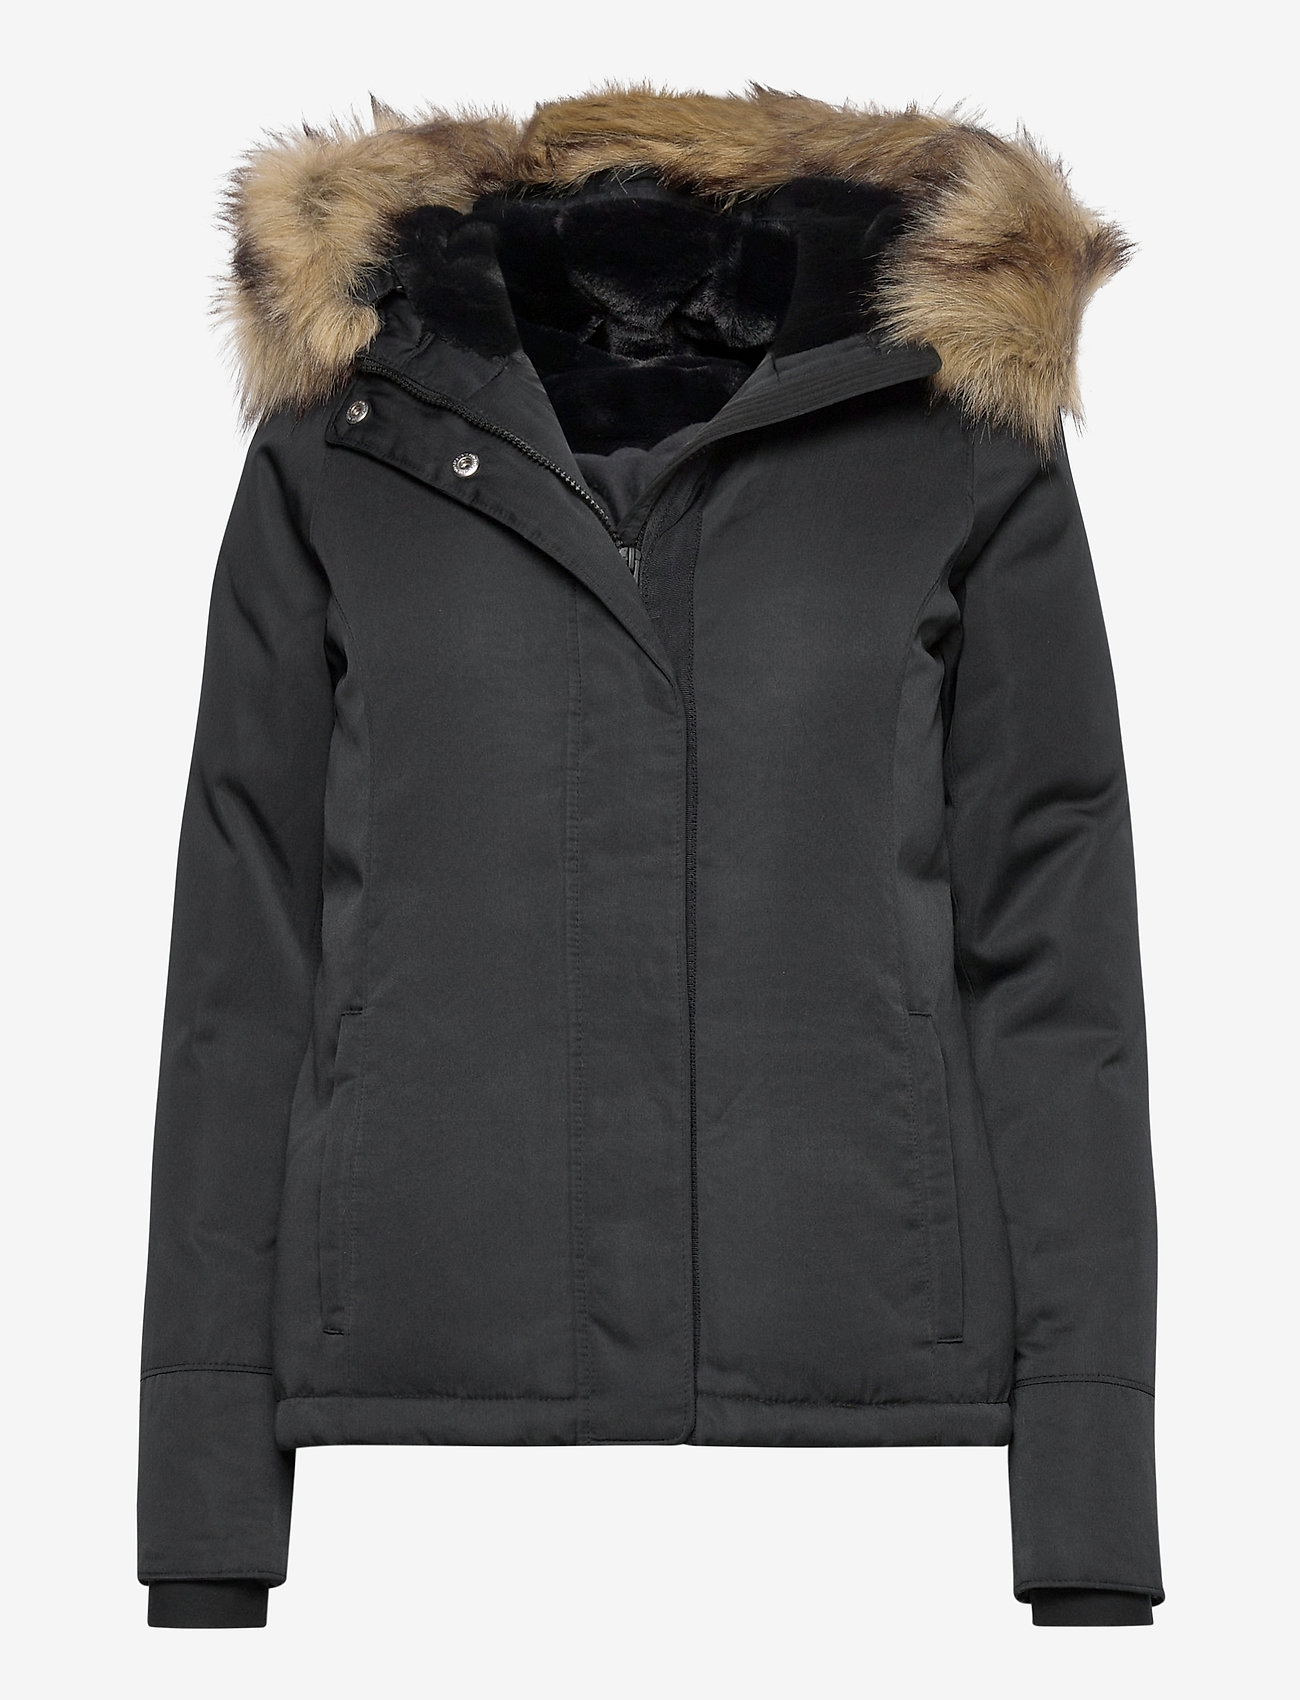 abercrombie and fitch parka womens